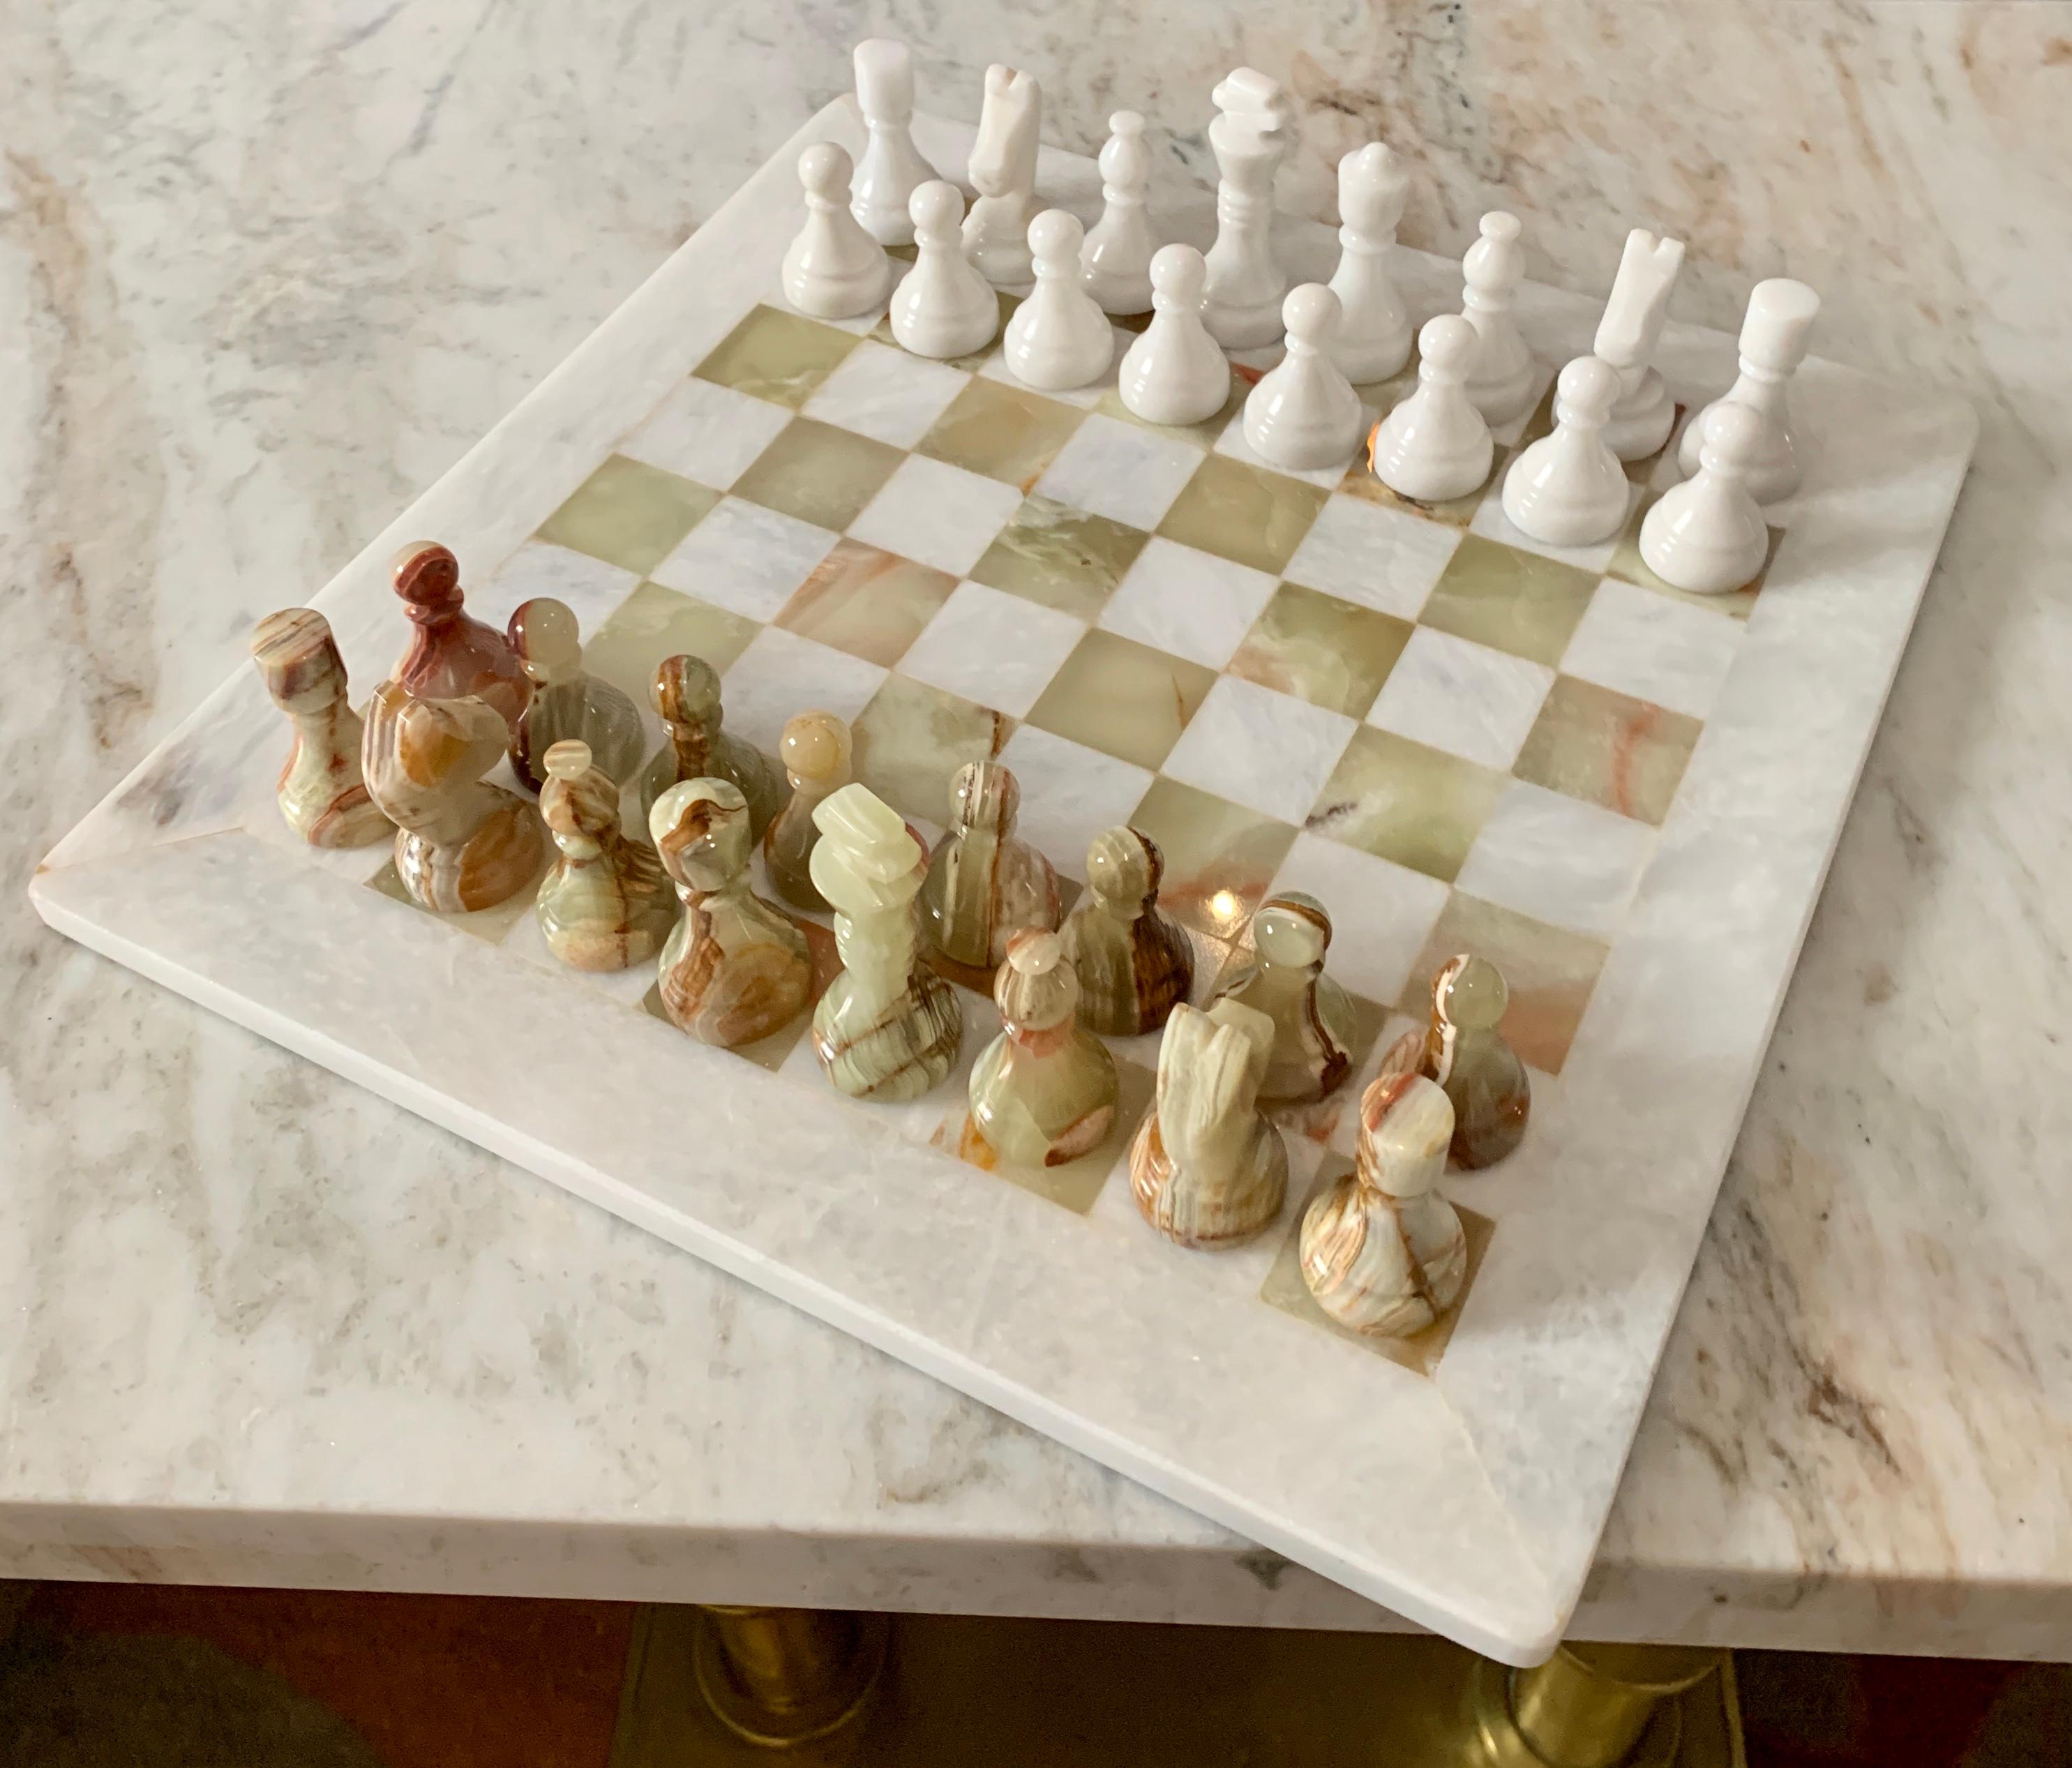 20th Century Handmade Onyx and Marble Chess Board and Pieces